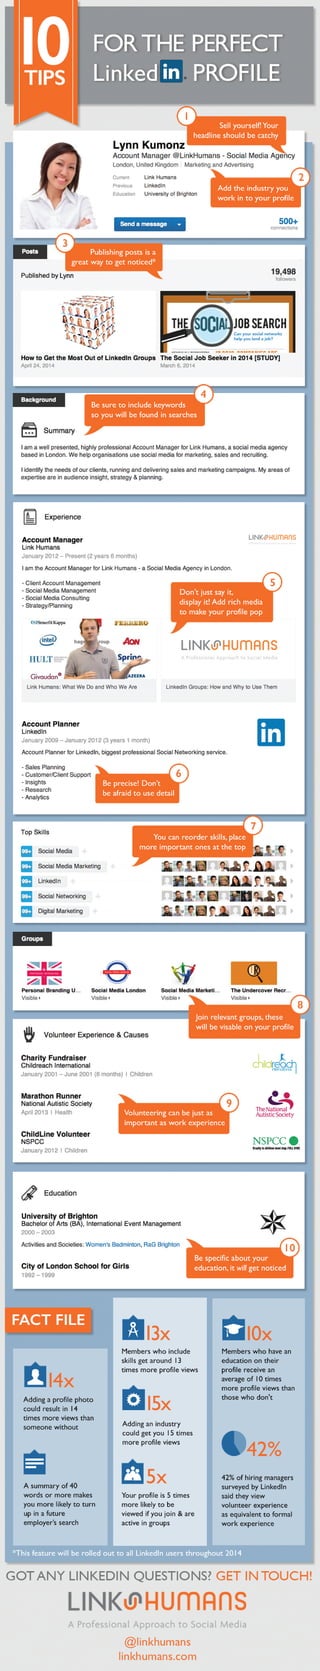 10 Tips to an awesome LinkedIn Profile.